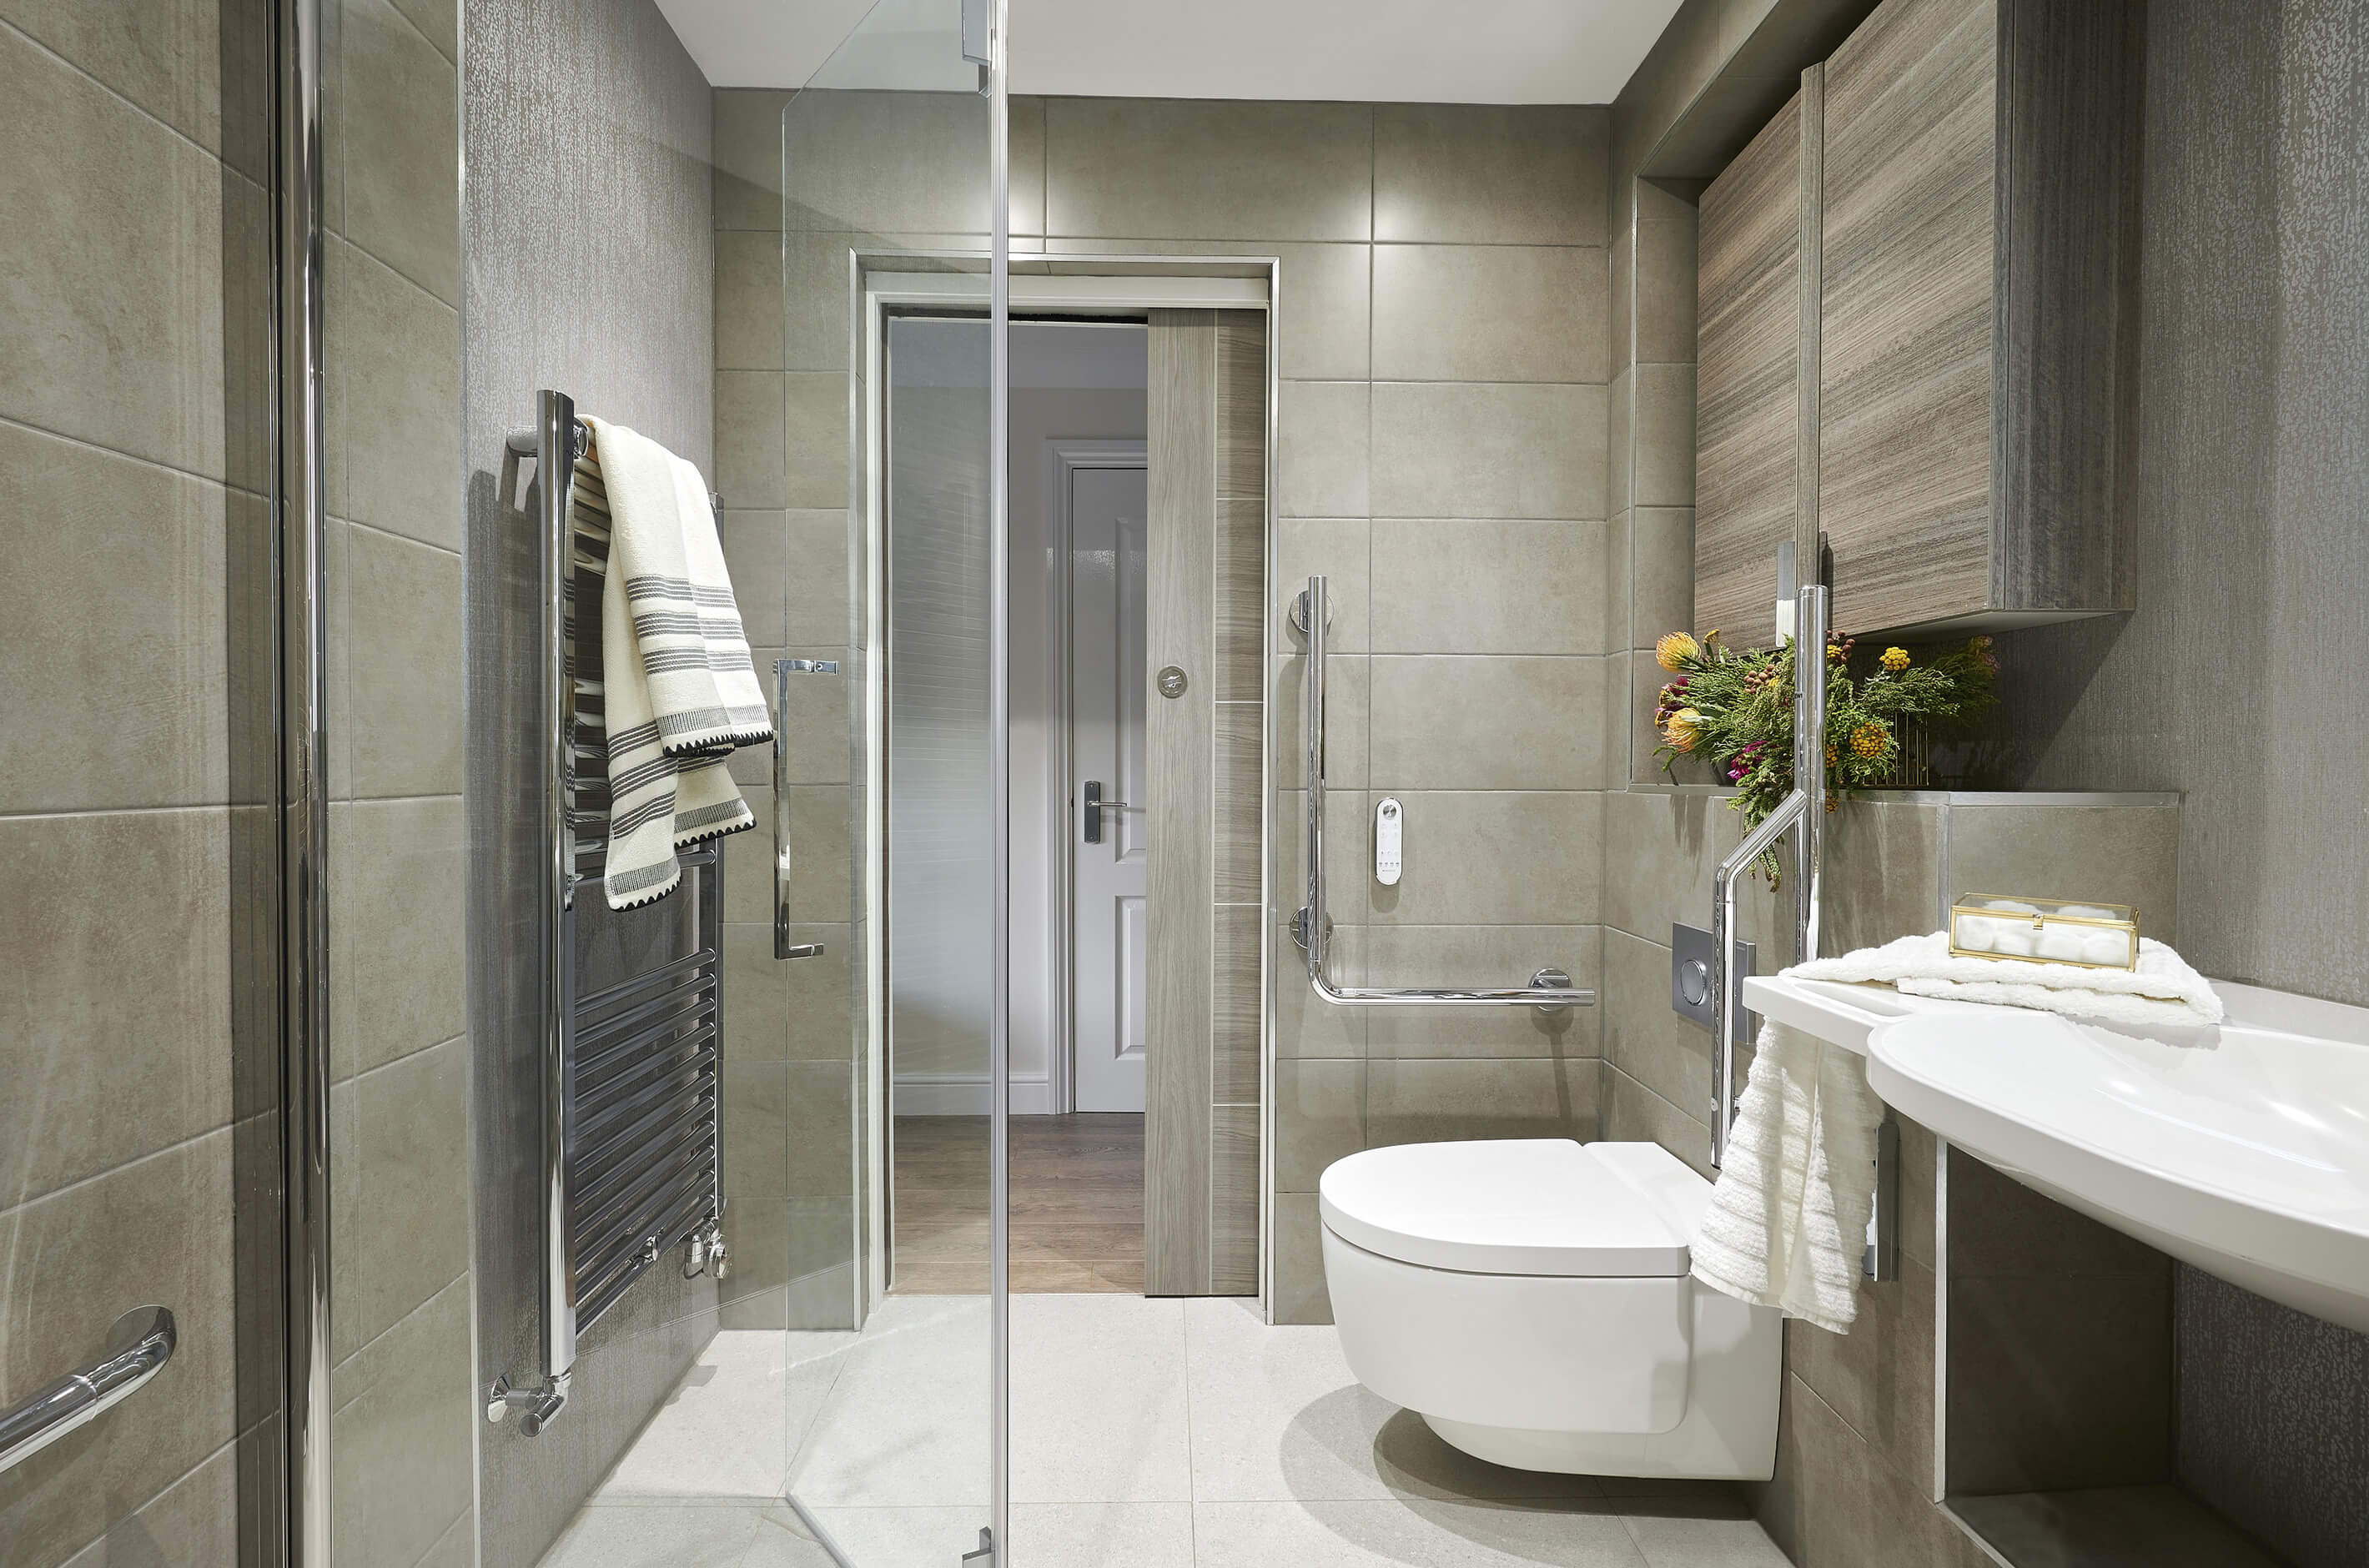 Natural-colour level access shower room with gold accents, with wash and dry toilet, grab rails and sliding door looking into hallway.